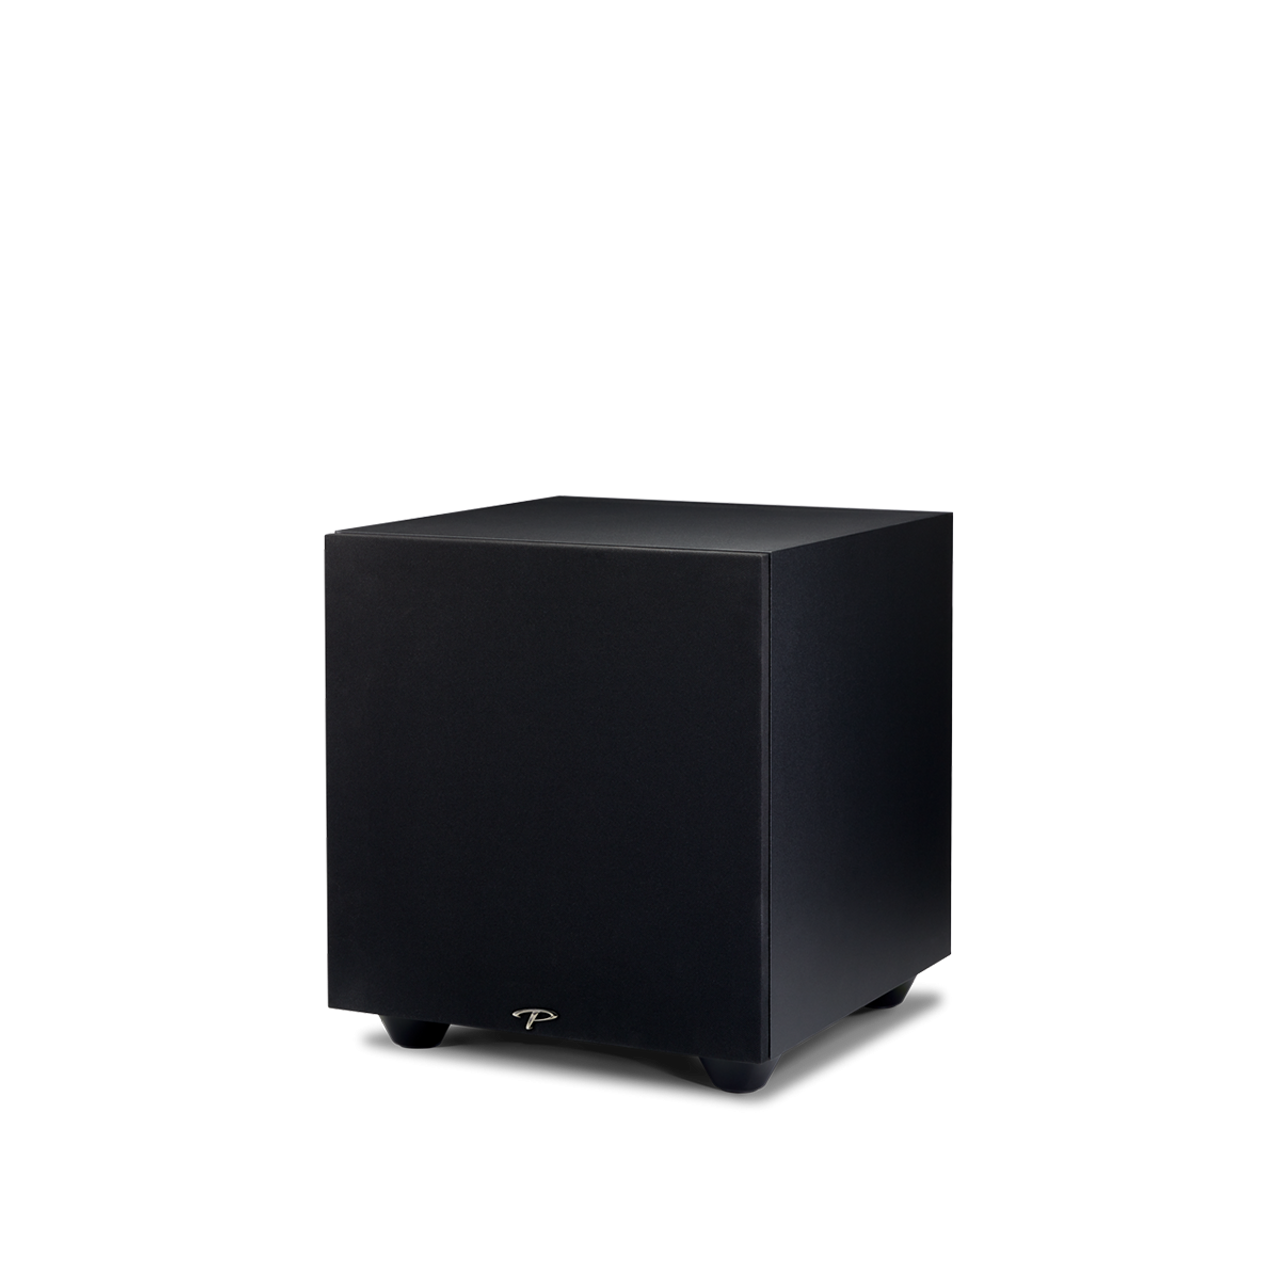 Paradigm Defiance V10 10" 120W RMS Powered Subwoofer